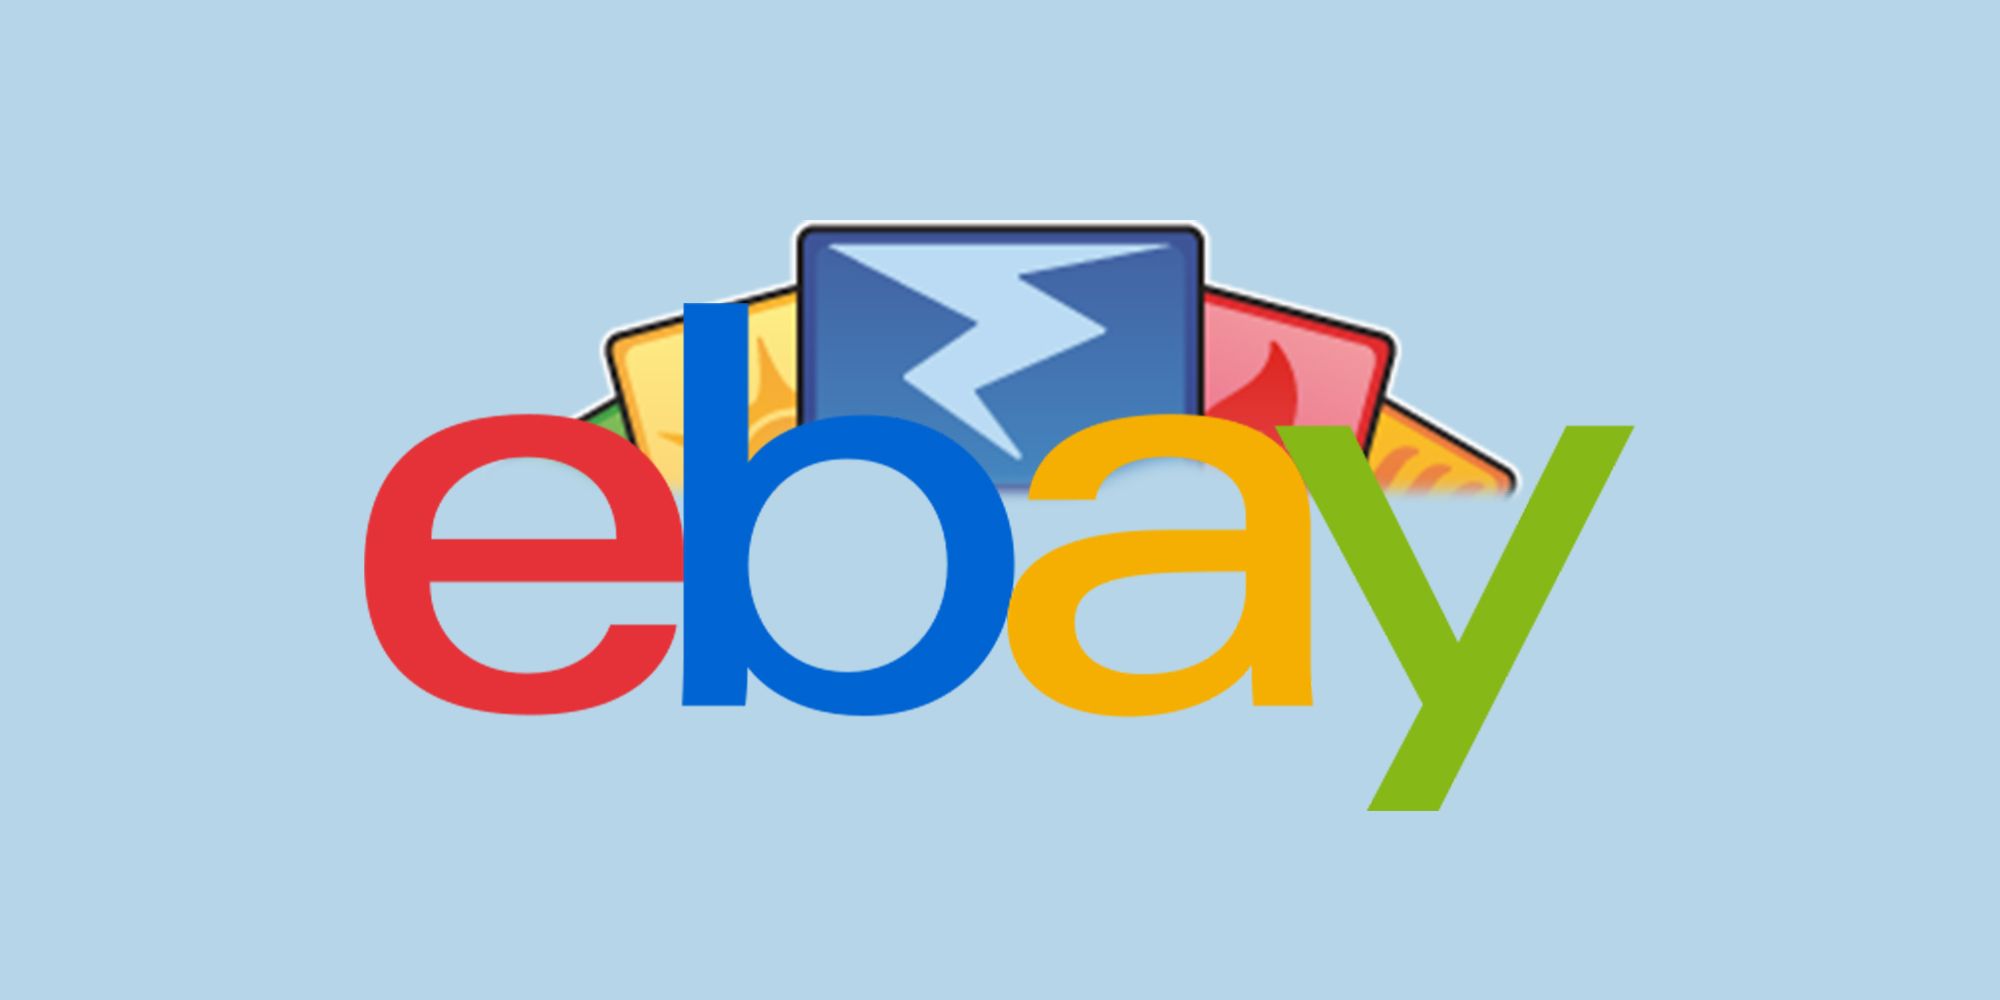 eBay To Acquire The Largest Trading Card Marketplace, TCGPlayer